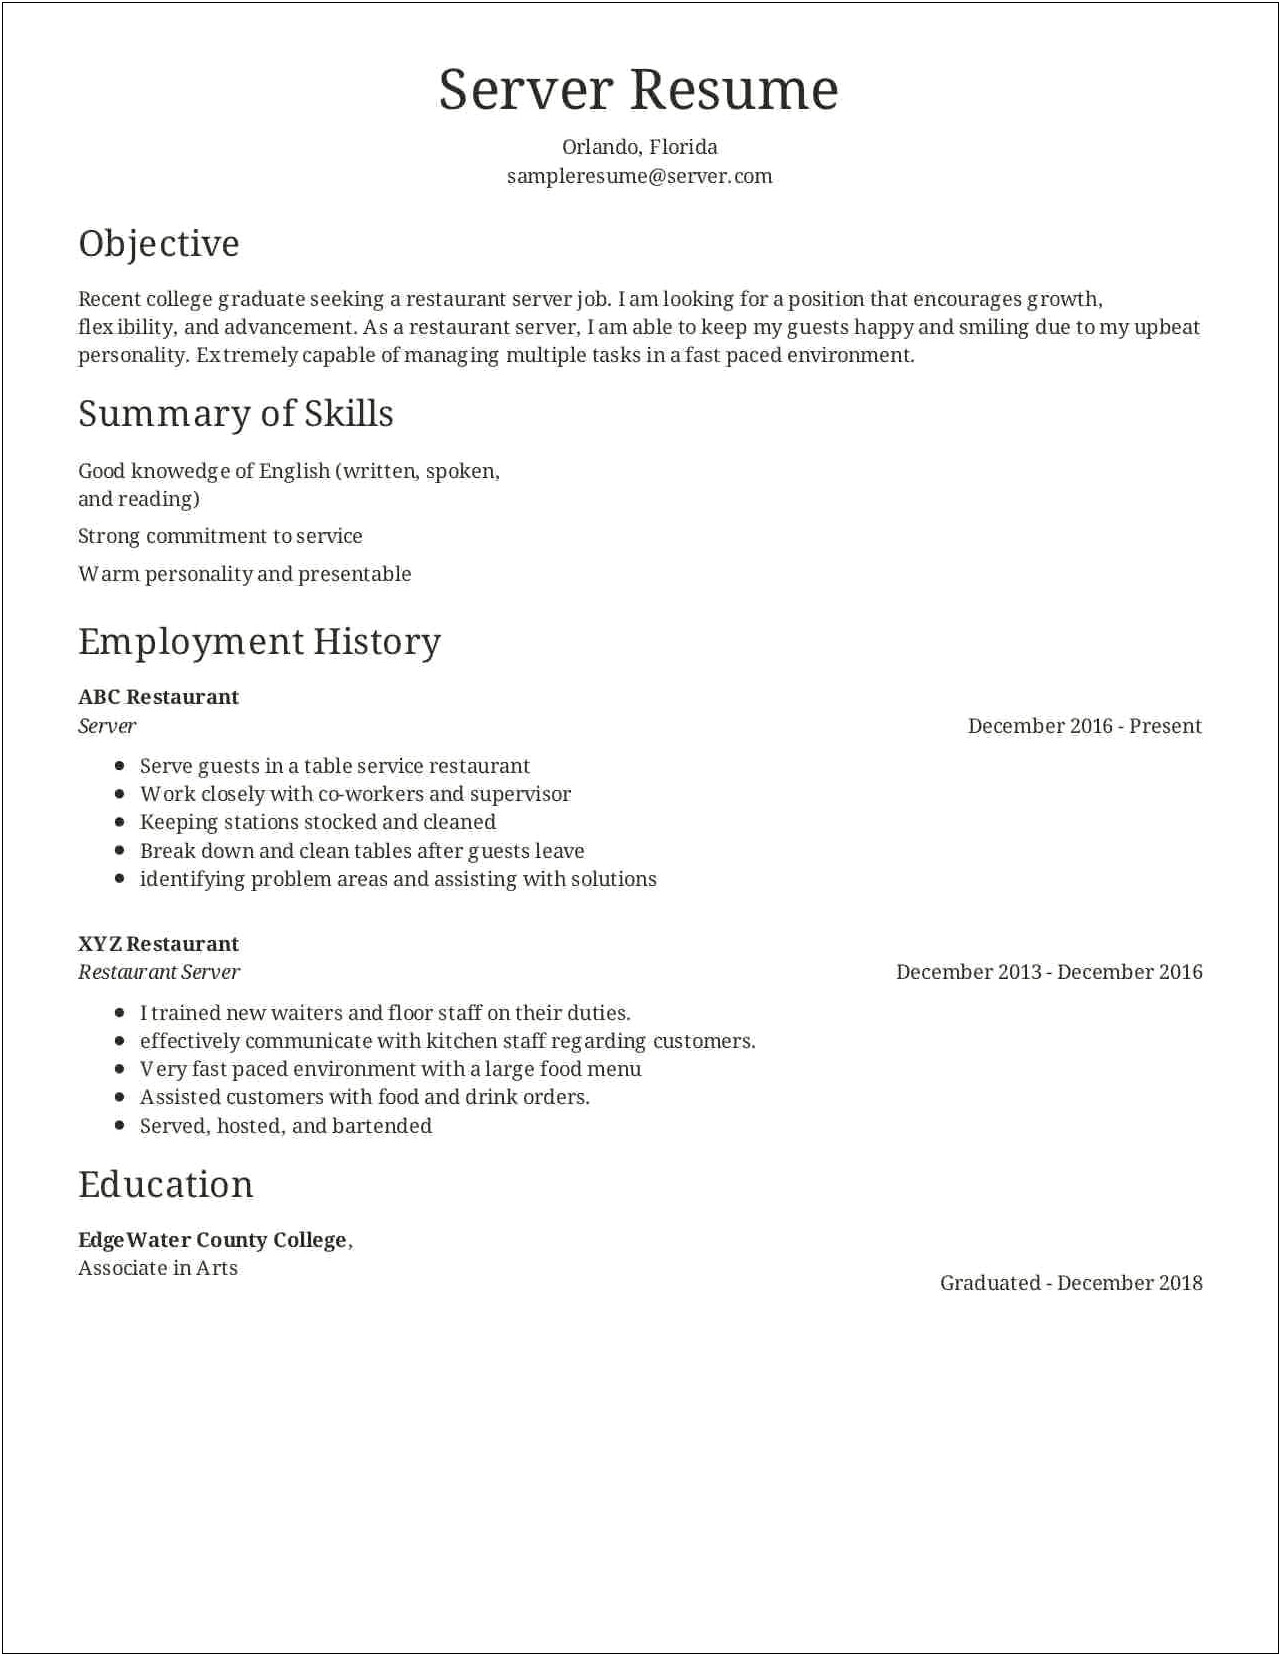 Resume Examples For Jobs Server